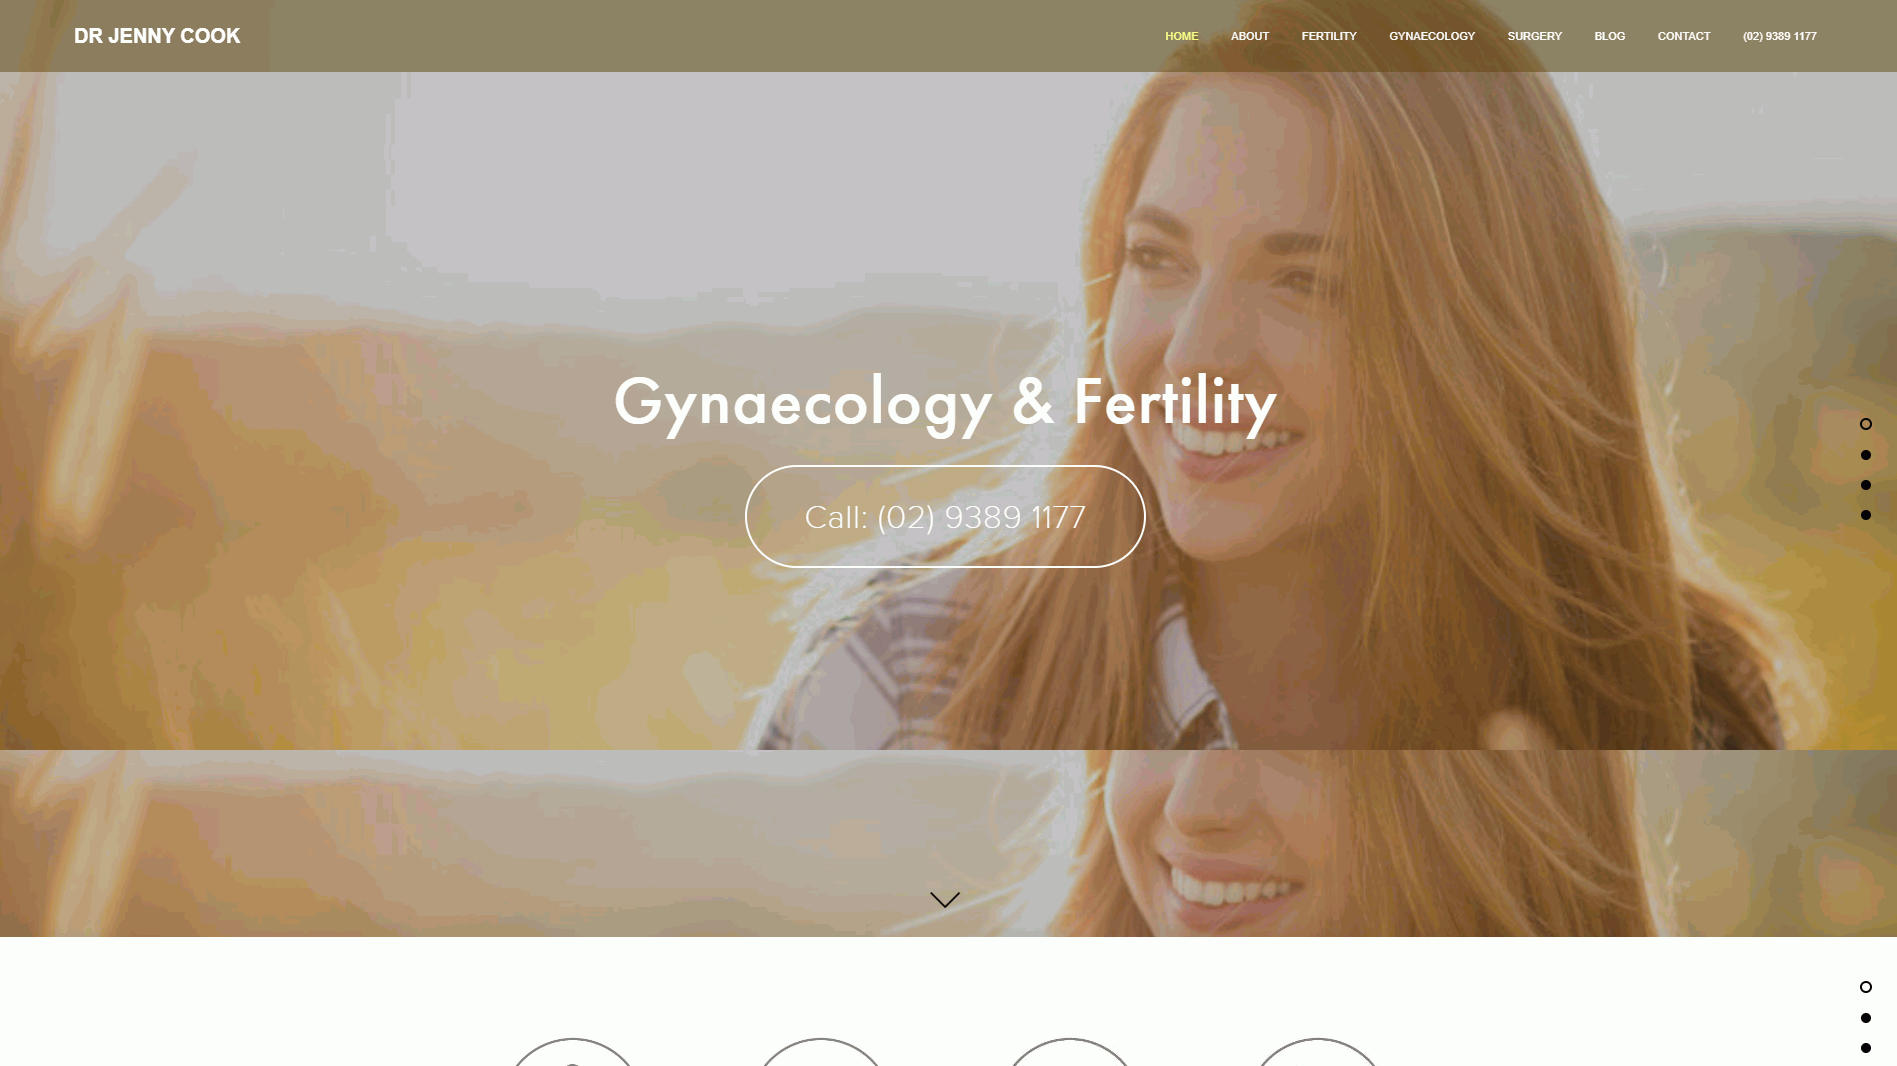 Dr Jenny Cook Gynaecologist and Fertility Specialist Website Design